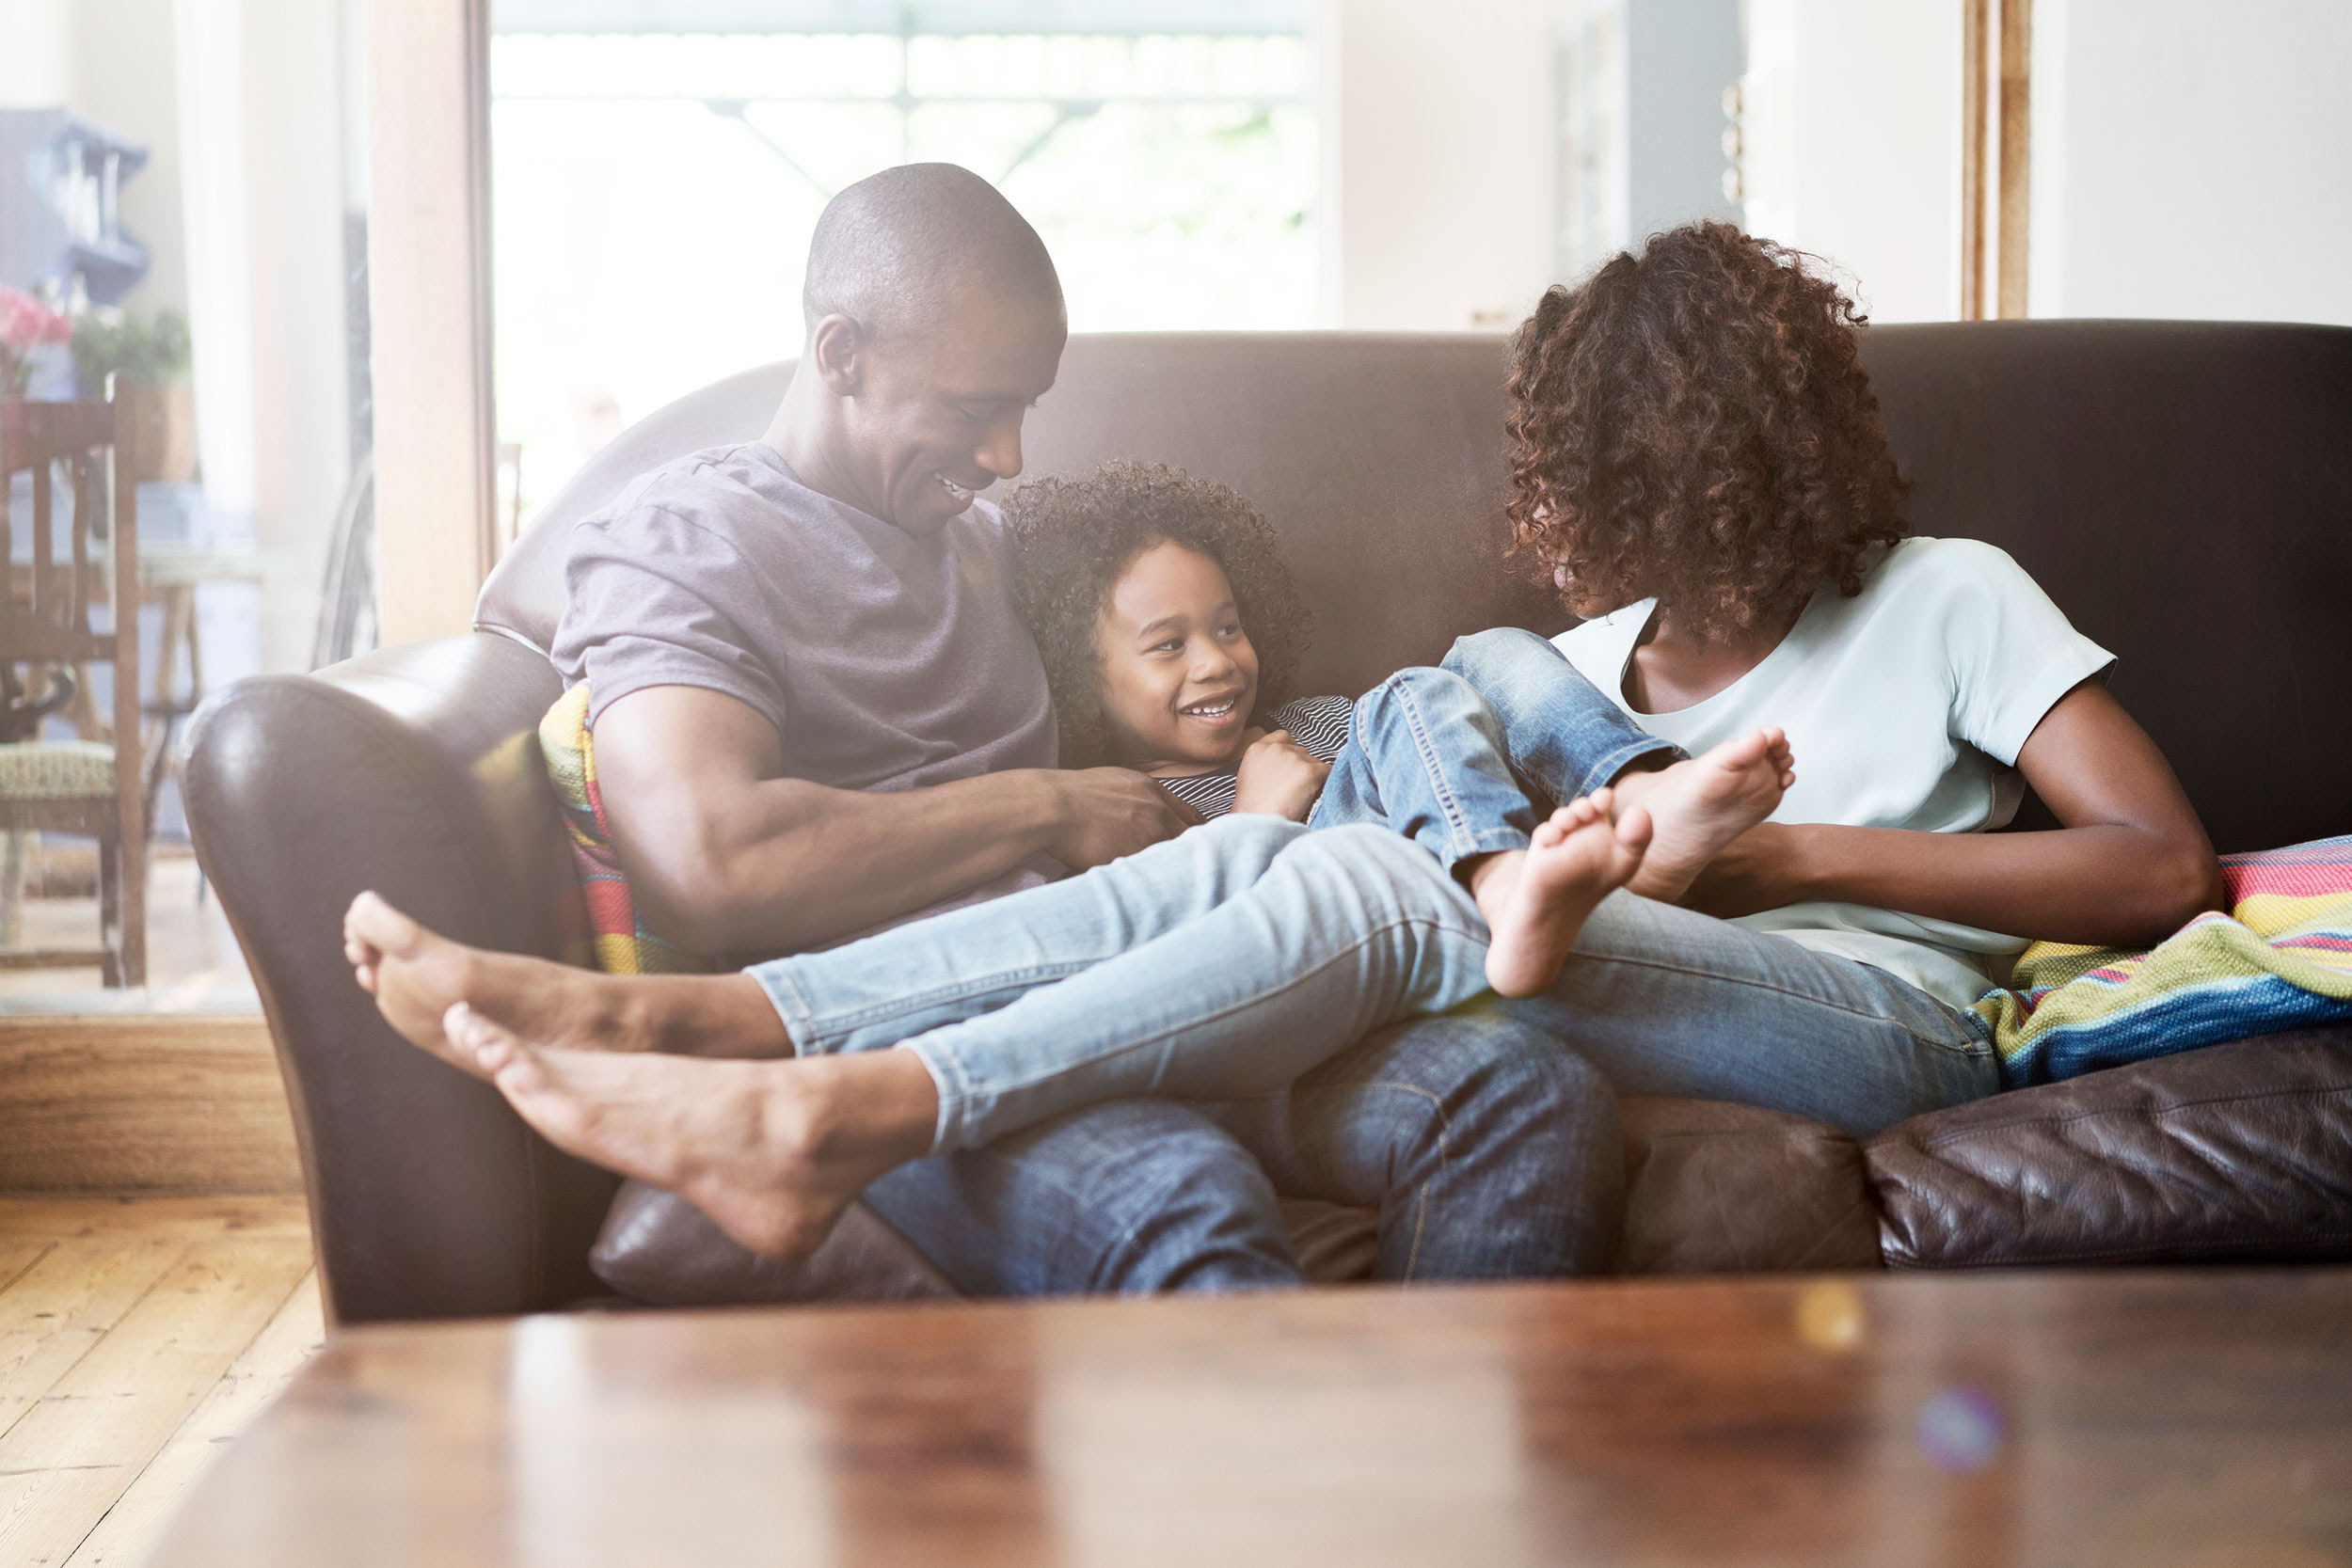 4 Ways Parents Can Balance Couple Time and Family Time